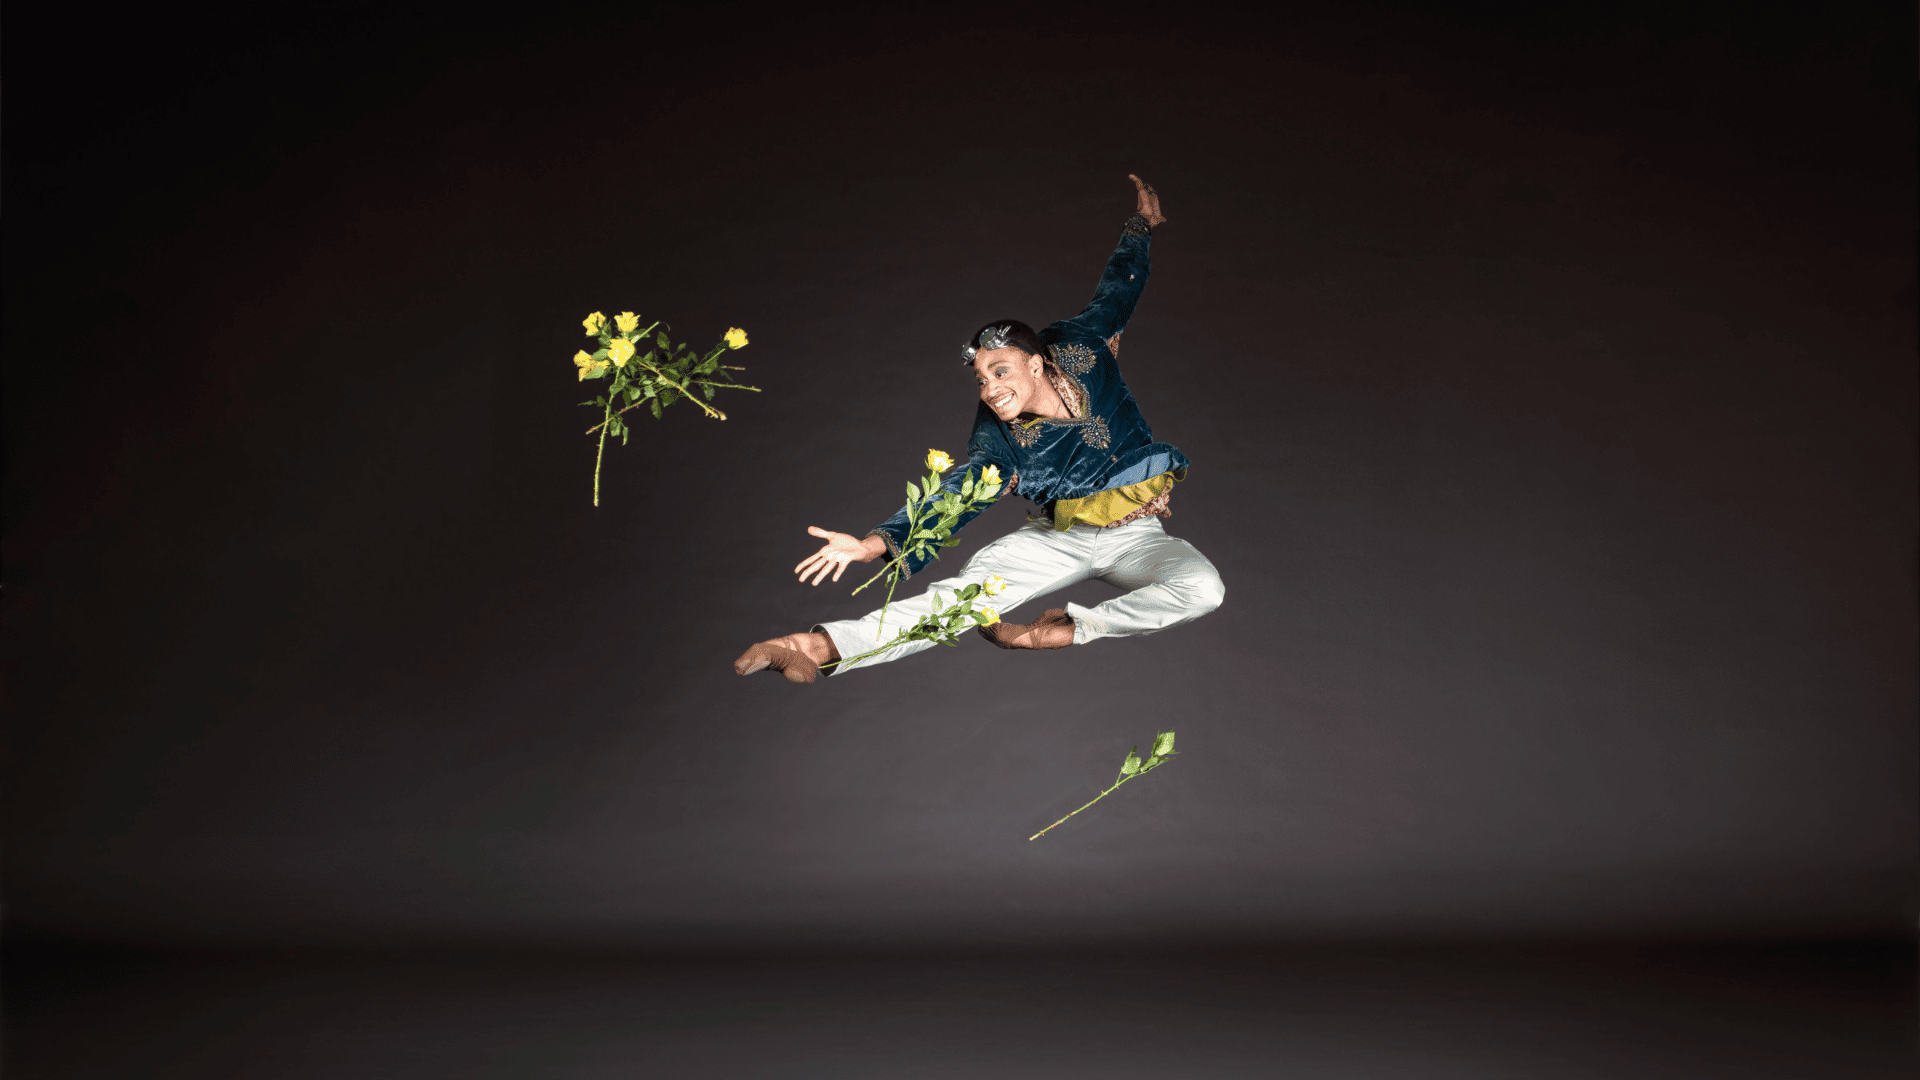 A ballet dancer leaps into the air, throwing flowers around them